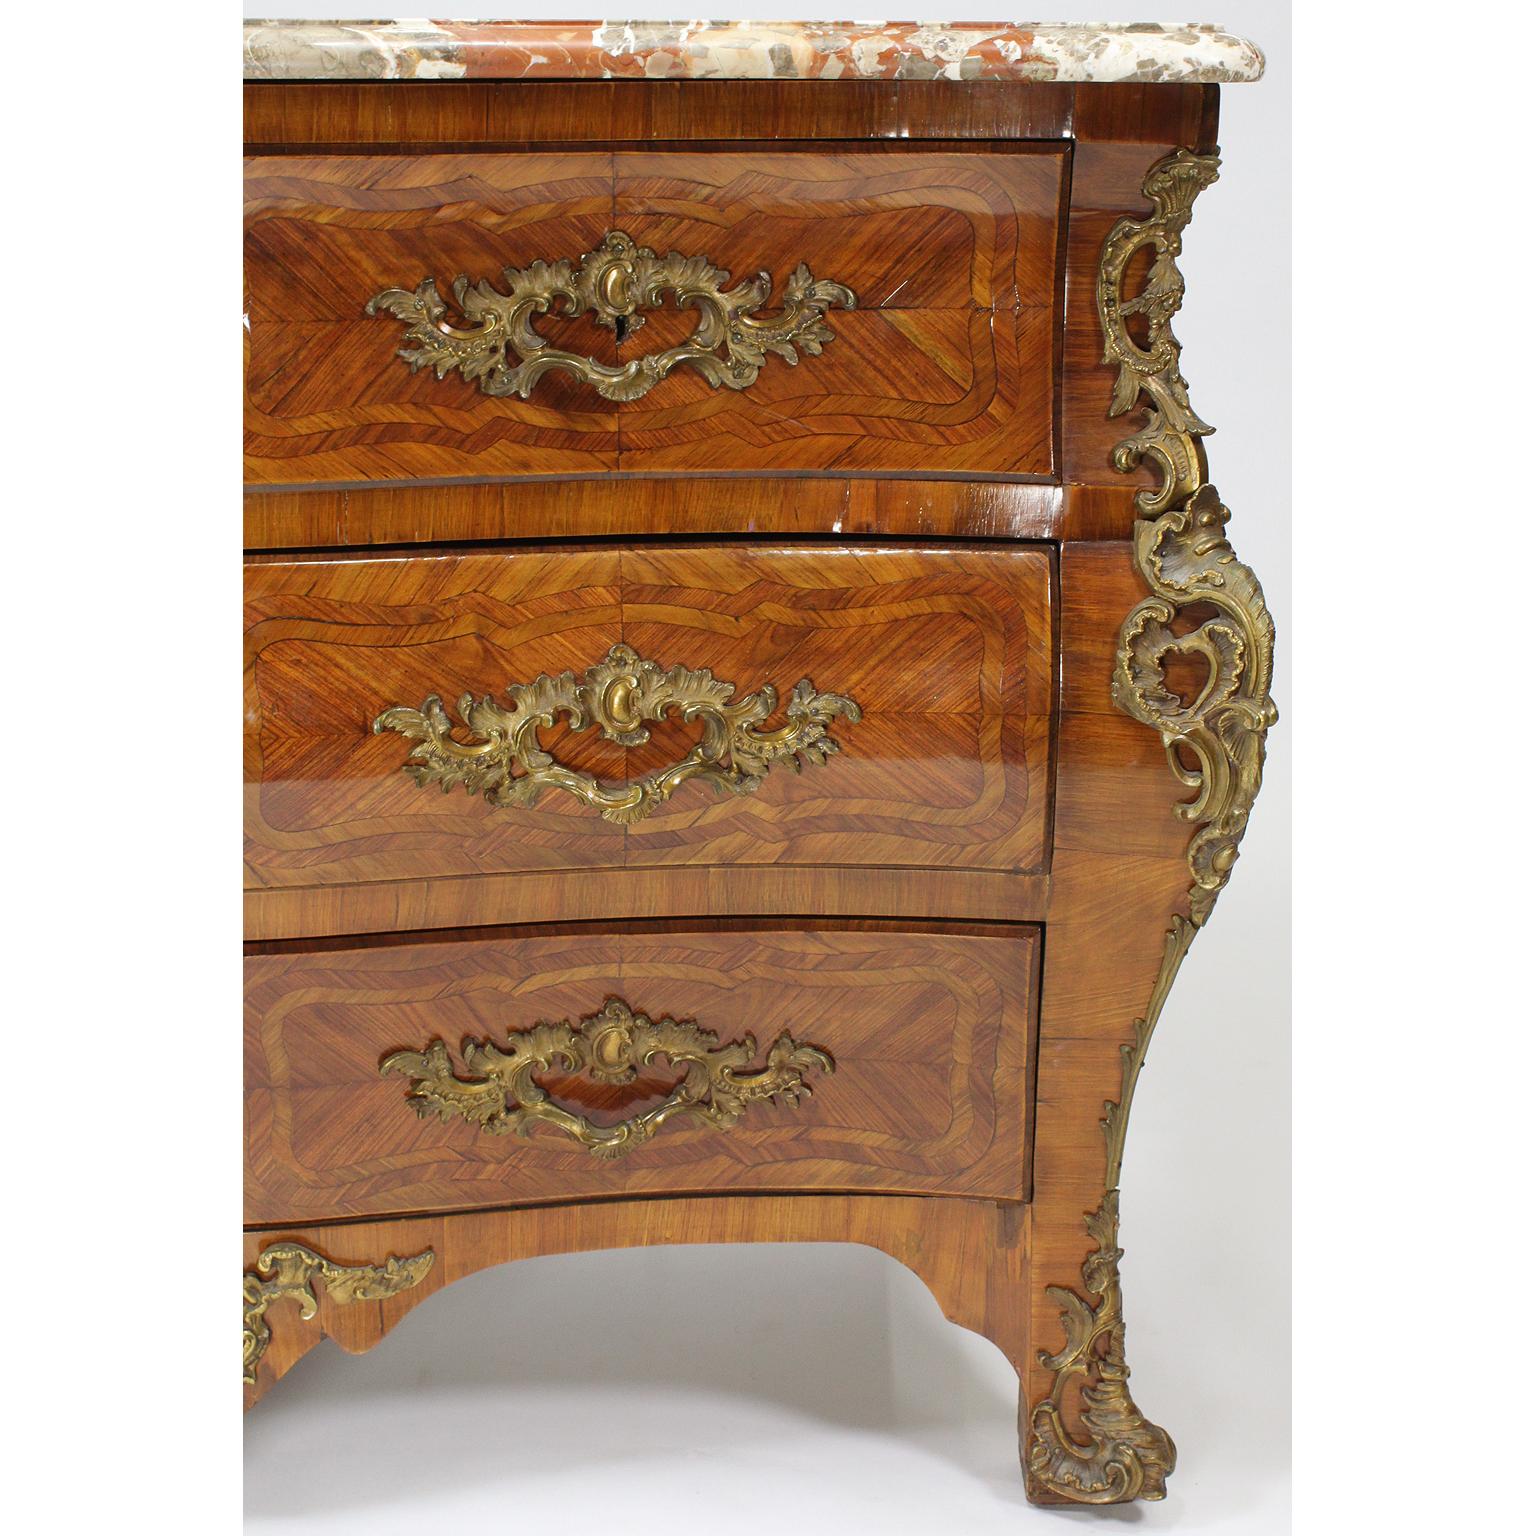 Early 20th Century French Regency 19th/20th Century Louis XV/XVI Style Gilt-Bronze Mounted Commode For Sale